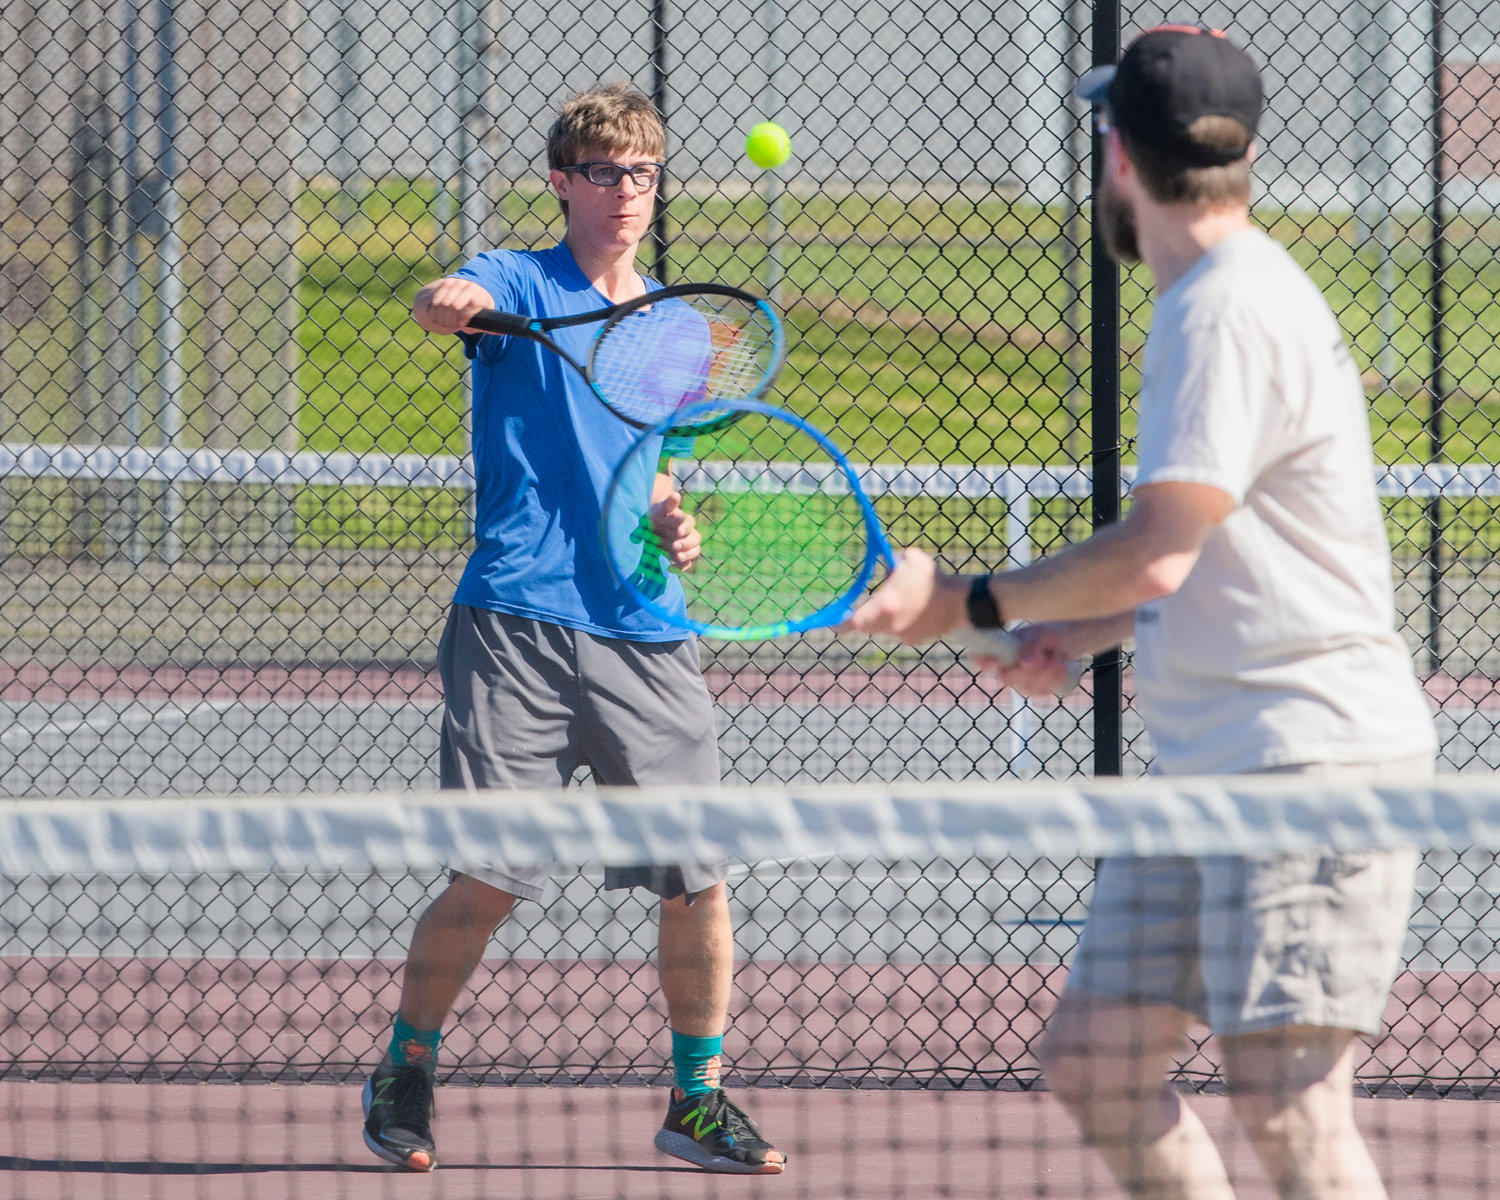 Sam and Brian Mittge play doubles during the Jack State Tennis Tournament at W.F. West High School on Saturday.